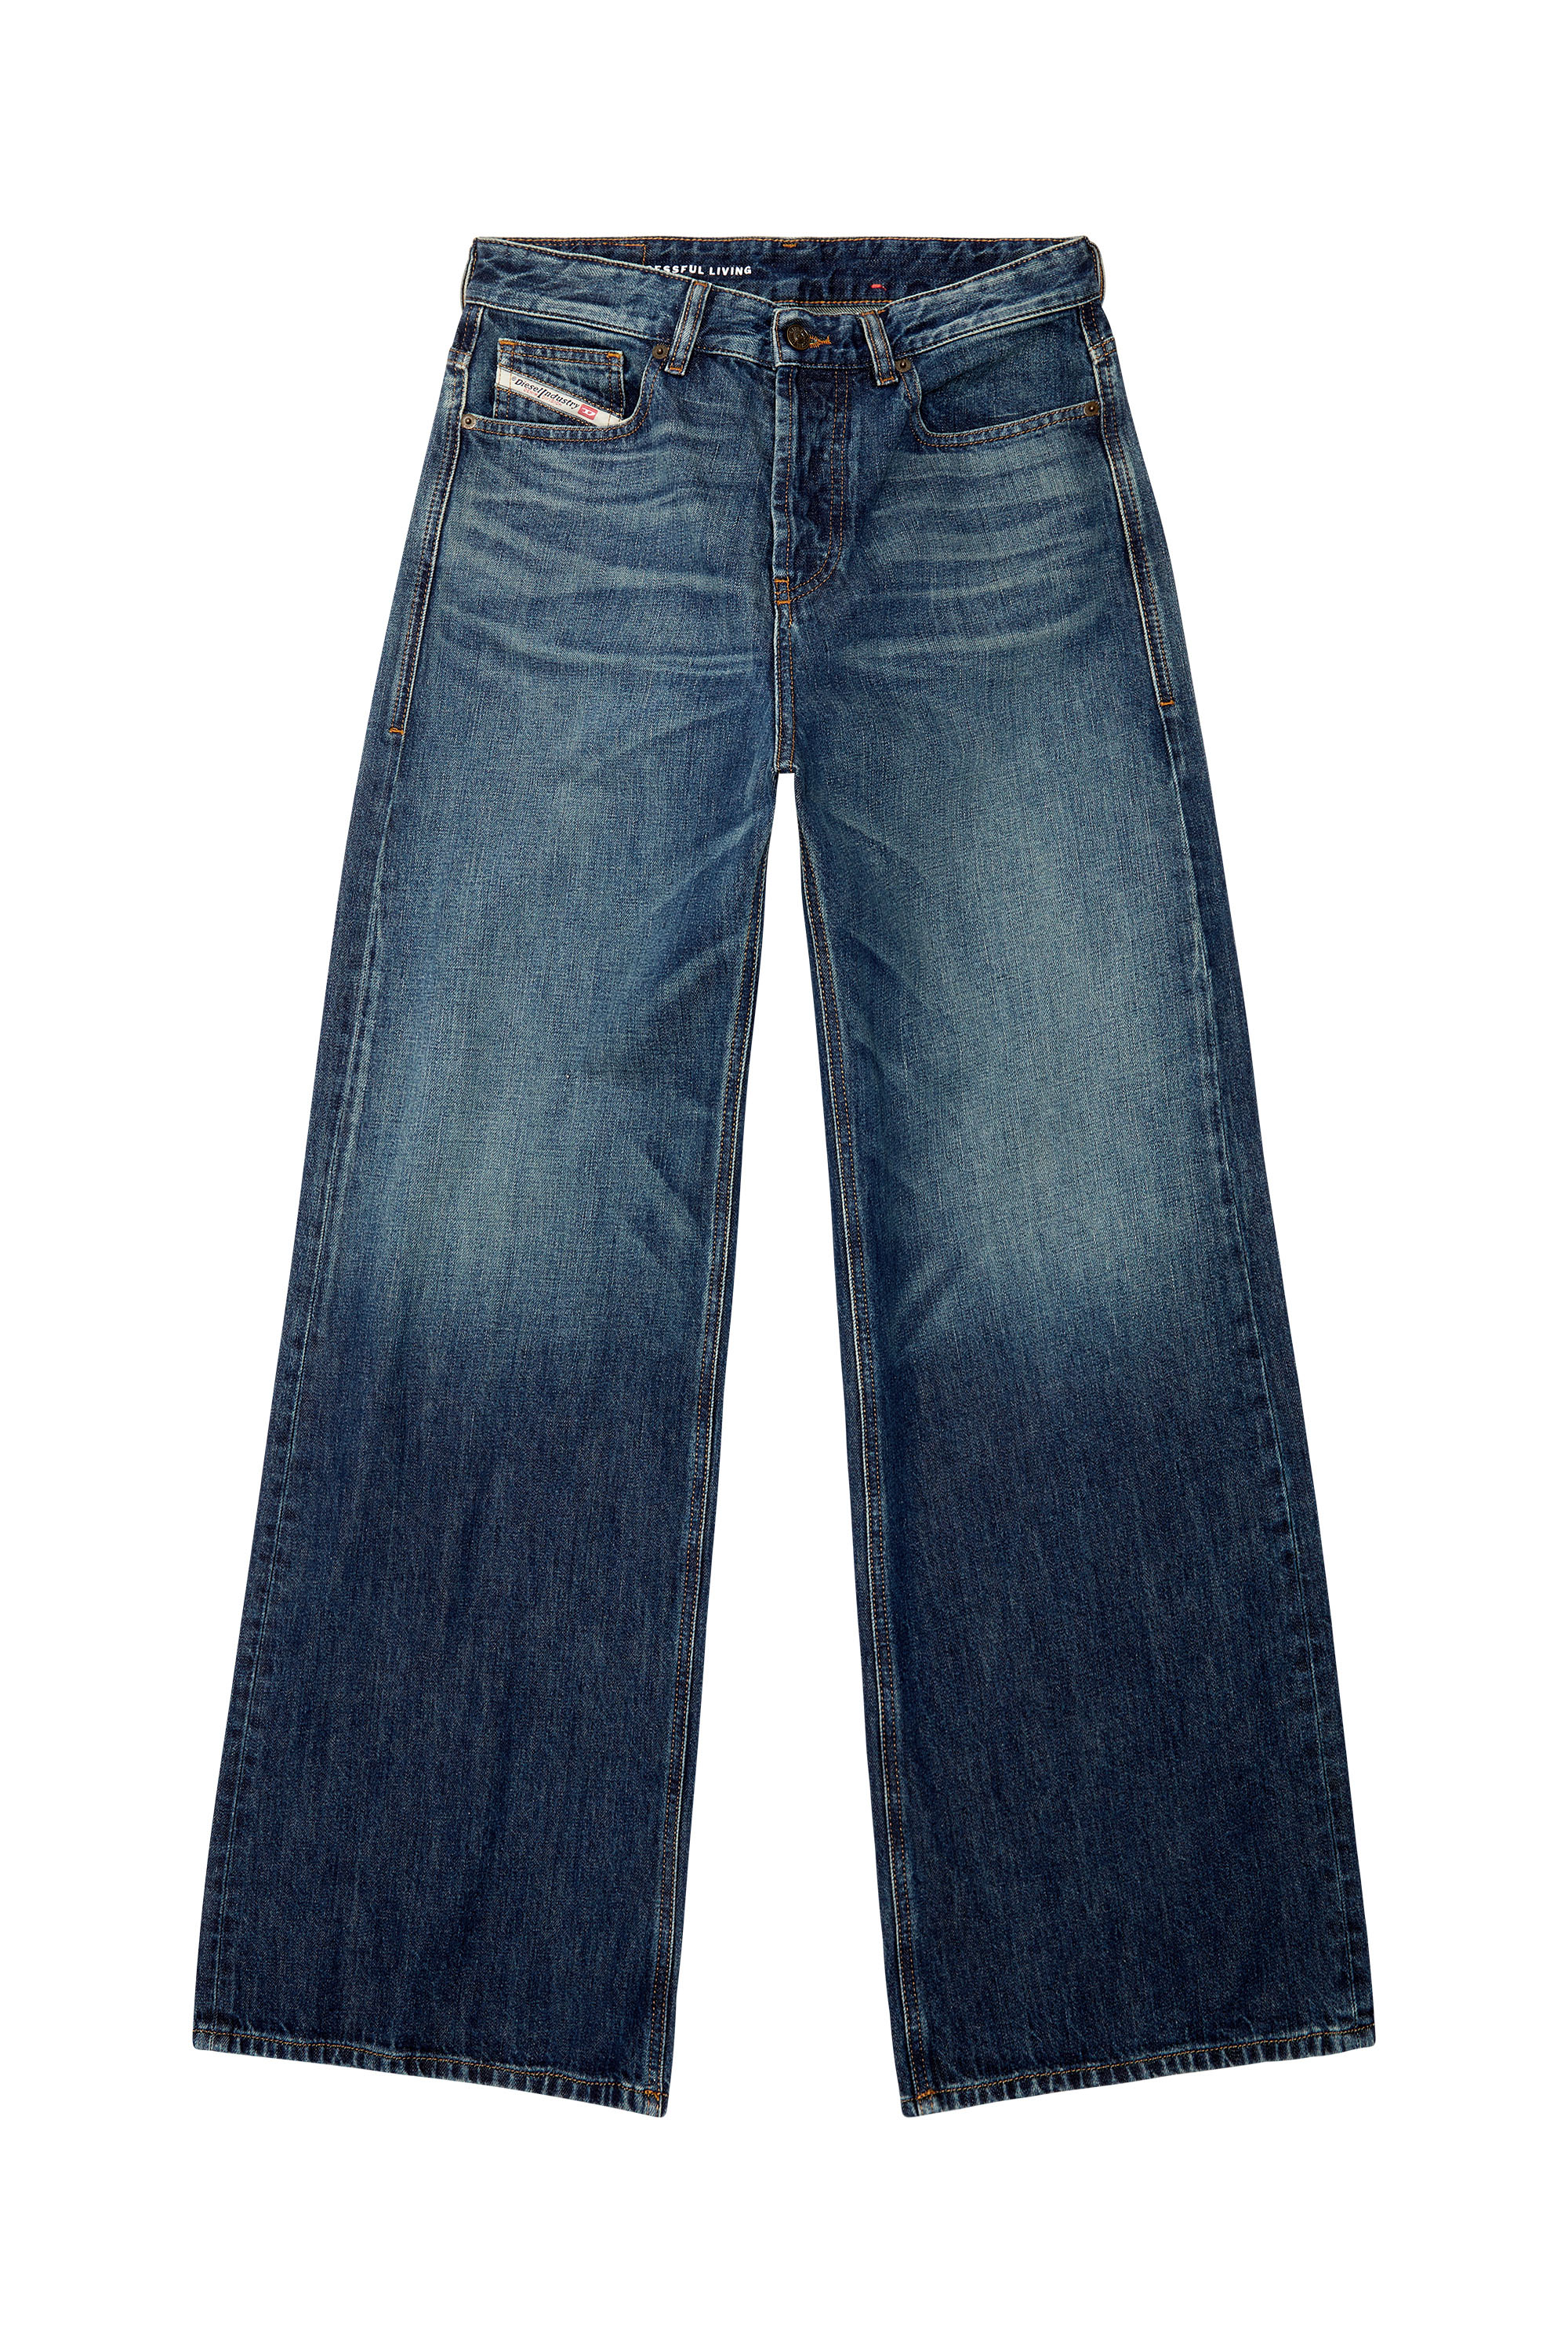 Diesel - Straight Jeans 1996 D-Sire 09H59, Mujer Straight Jeans - 1996 D-Sire in Azul marino - Image 7